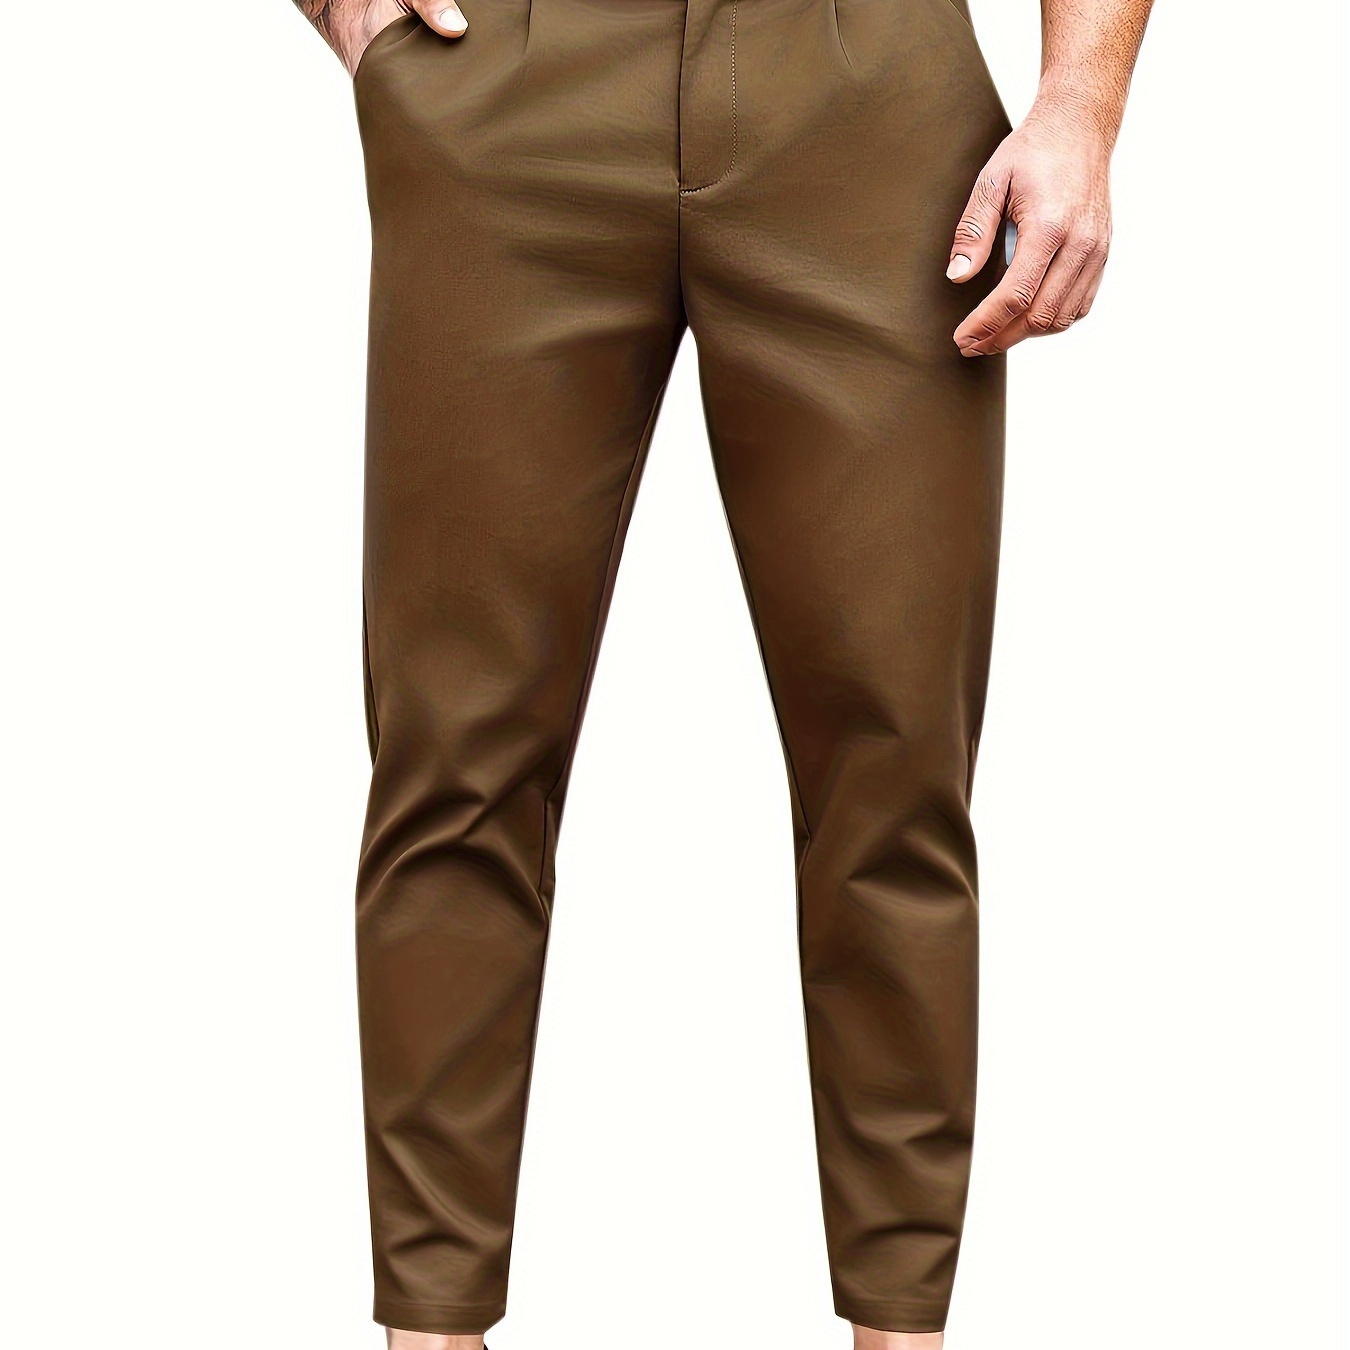 

Mens Chino Pants Slim Fit Flat Front Stretch Skinny Tapered Dress Pants Casual Trousers